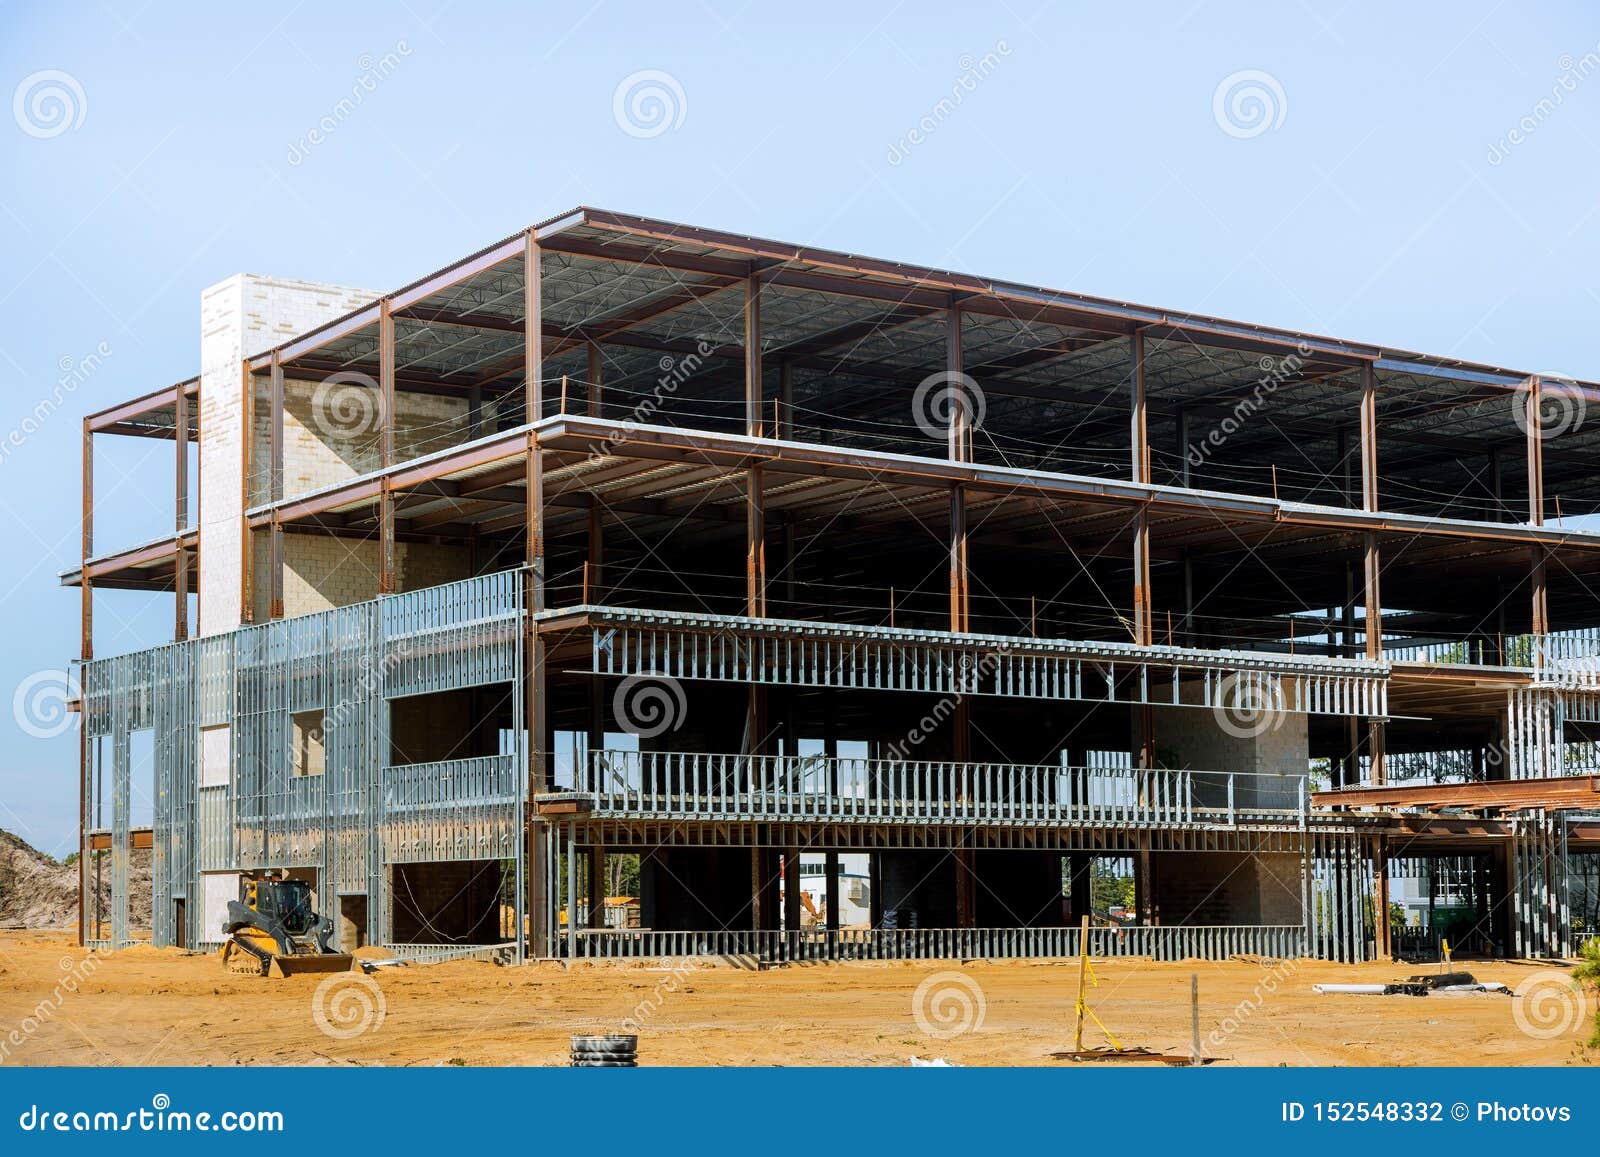 Building Under Construction With Steel Beam Stock Photo